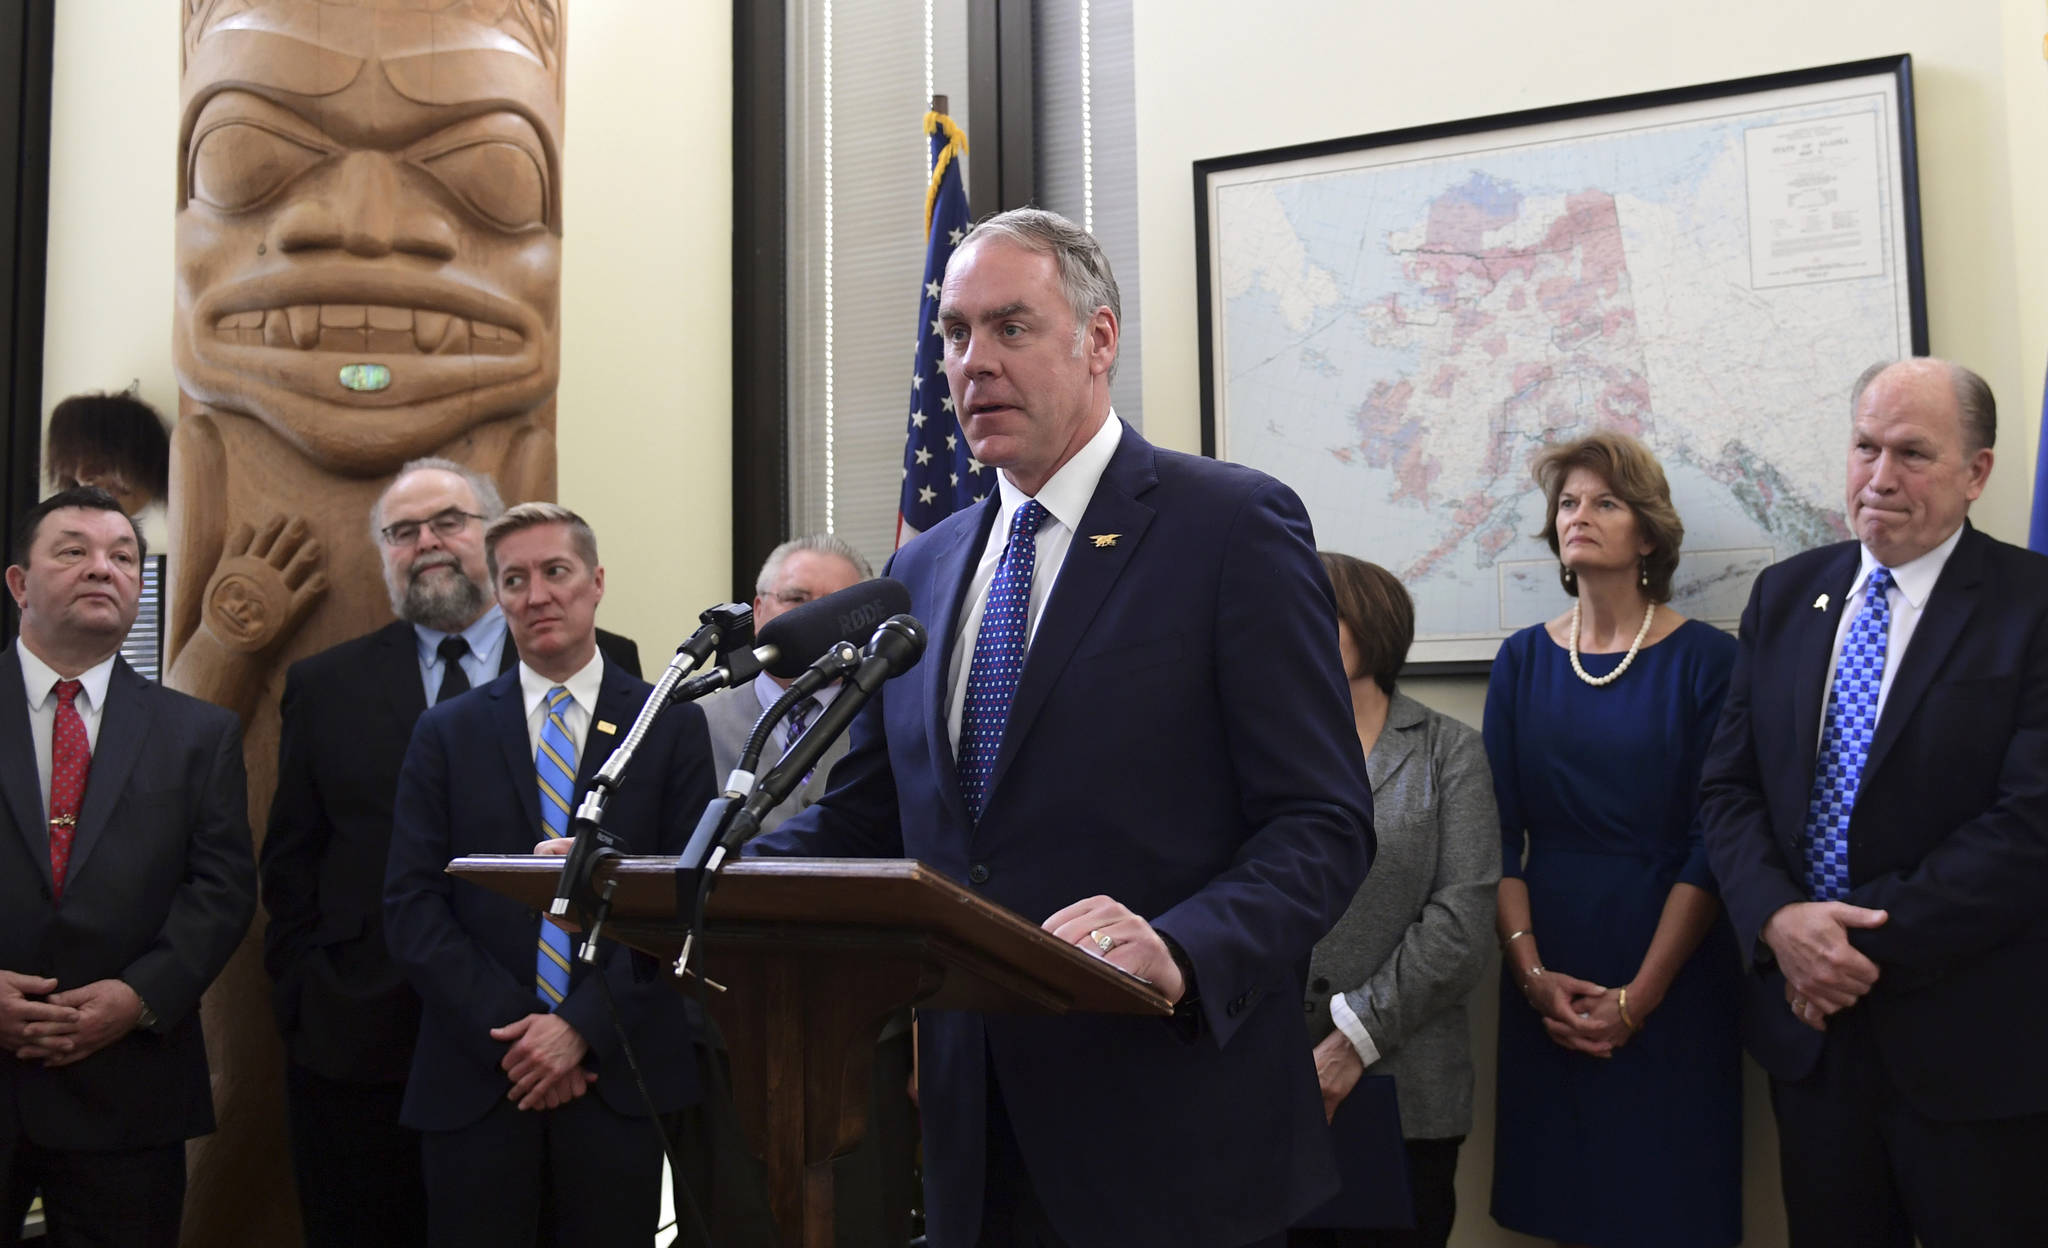 Interior Secretary Ryan Zinke, center, speaks during an event in the office of Sen. Lisa Murkowski, R-Alaska, second from right, on Capitol Hill in Washington, Monday, Jan. 22, 2018. Zinke was joined by Alaskan officials regarding the Interior Department’s decision to the construction of a road through a national wildlife refuge in Alaska.The road would connect the communities of King Cove and Cold Bay, which has an all-weather airport needed for emergency medical flights. Alaska Gov. Bill Walker listens at right. (AP Photo/Susan Walsh)